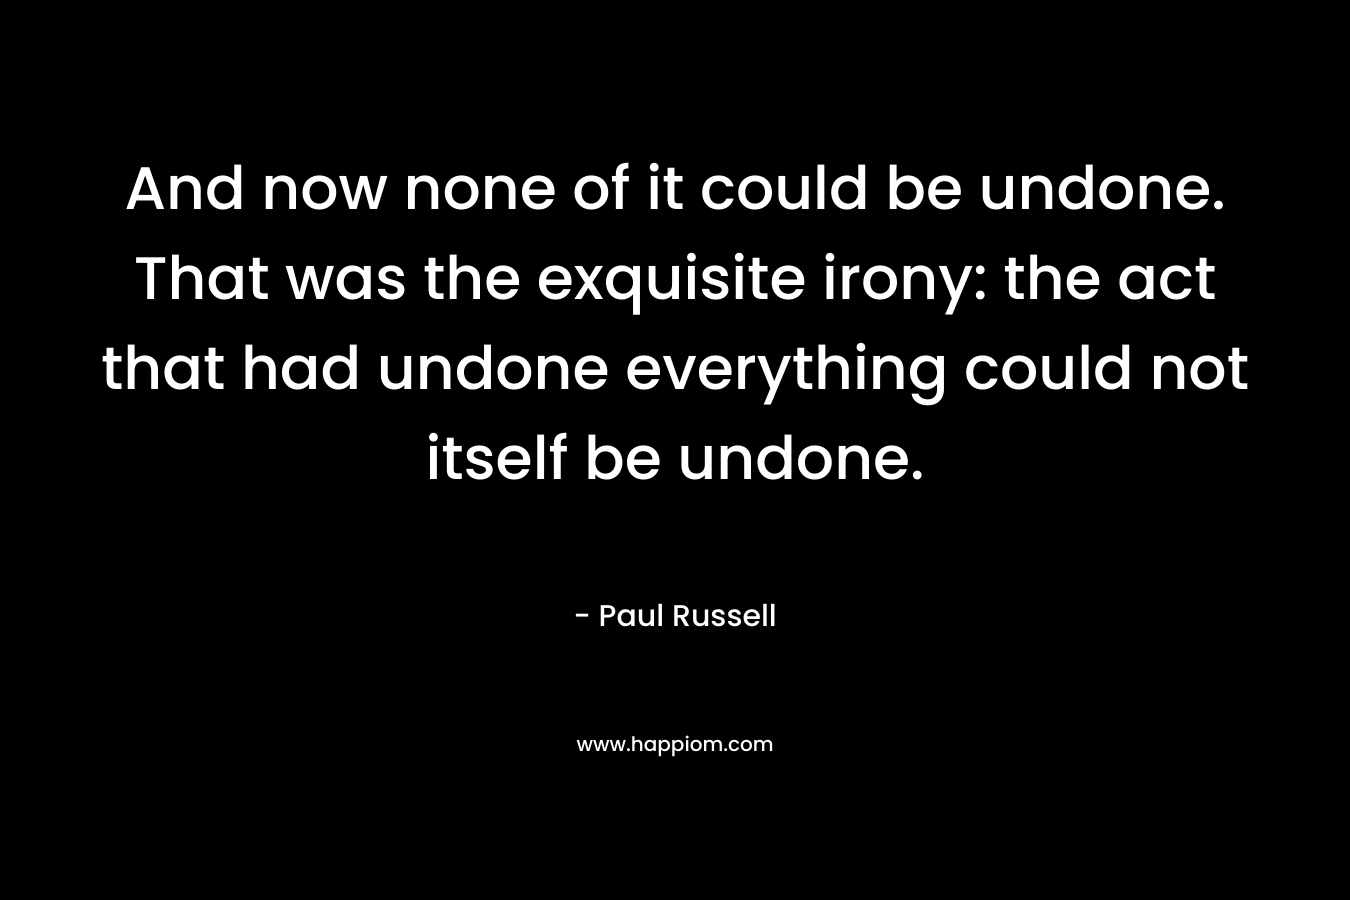 And now none of it could be undone. That was the exquisite irony: the act that had undone everything could not itself be undone. – Paul Russell